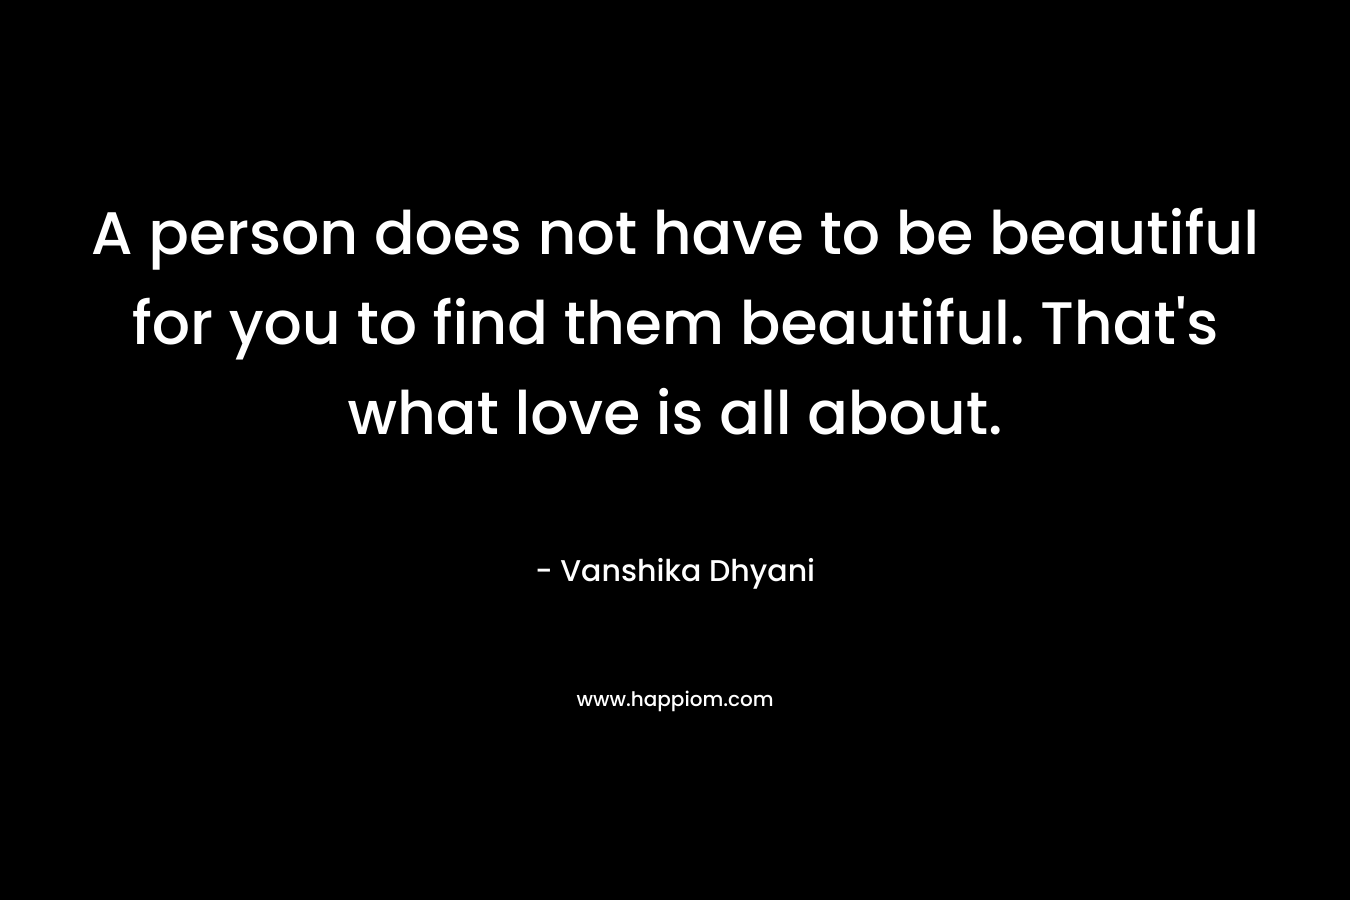 A person does not have to be beautiful for you to find them beautiful. That's what love is all about.